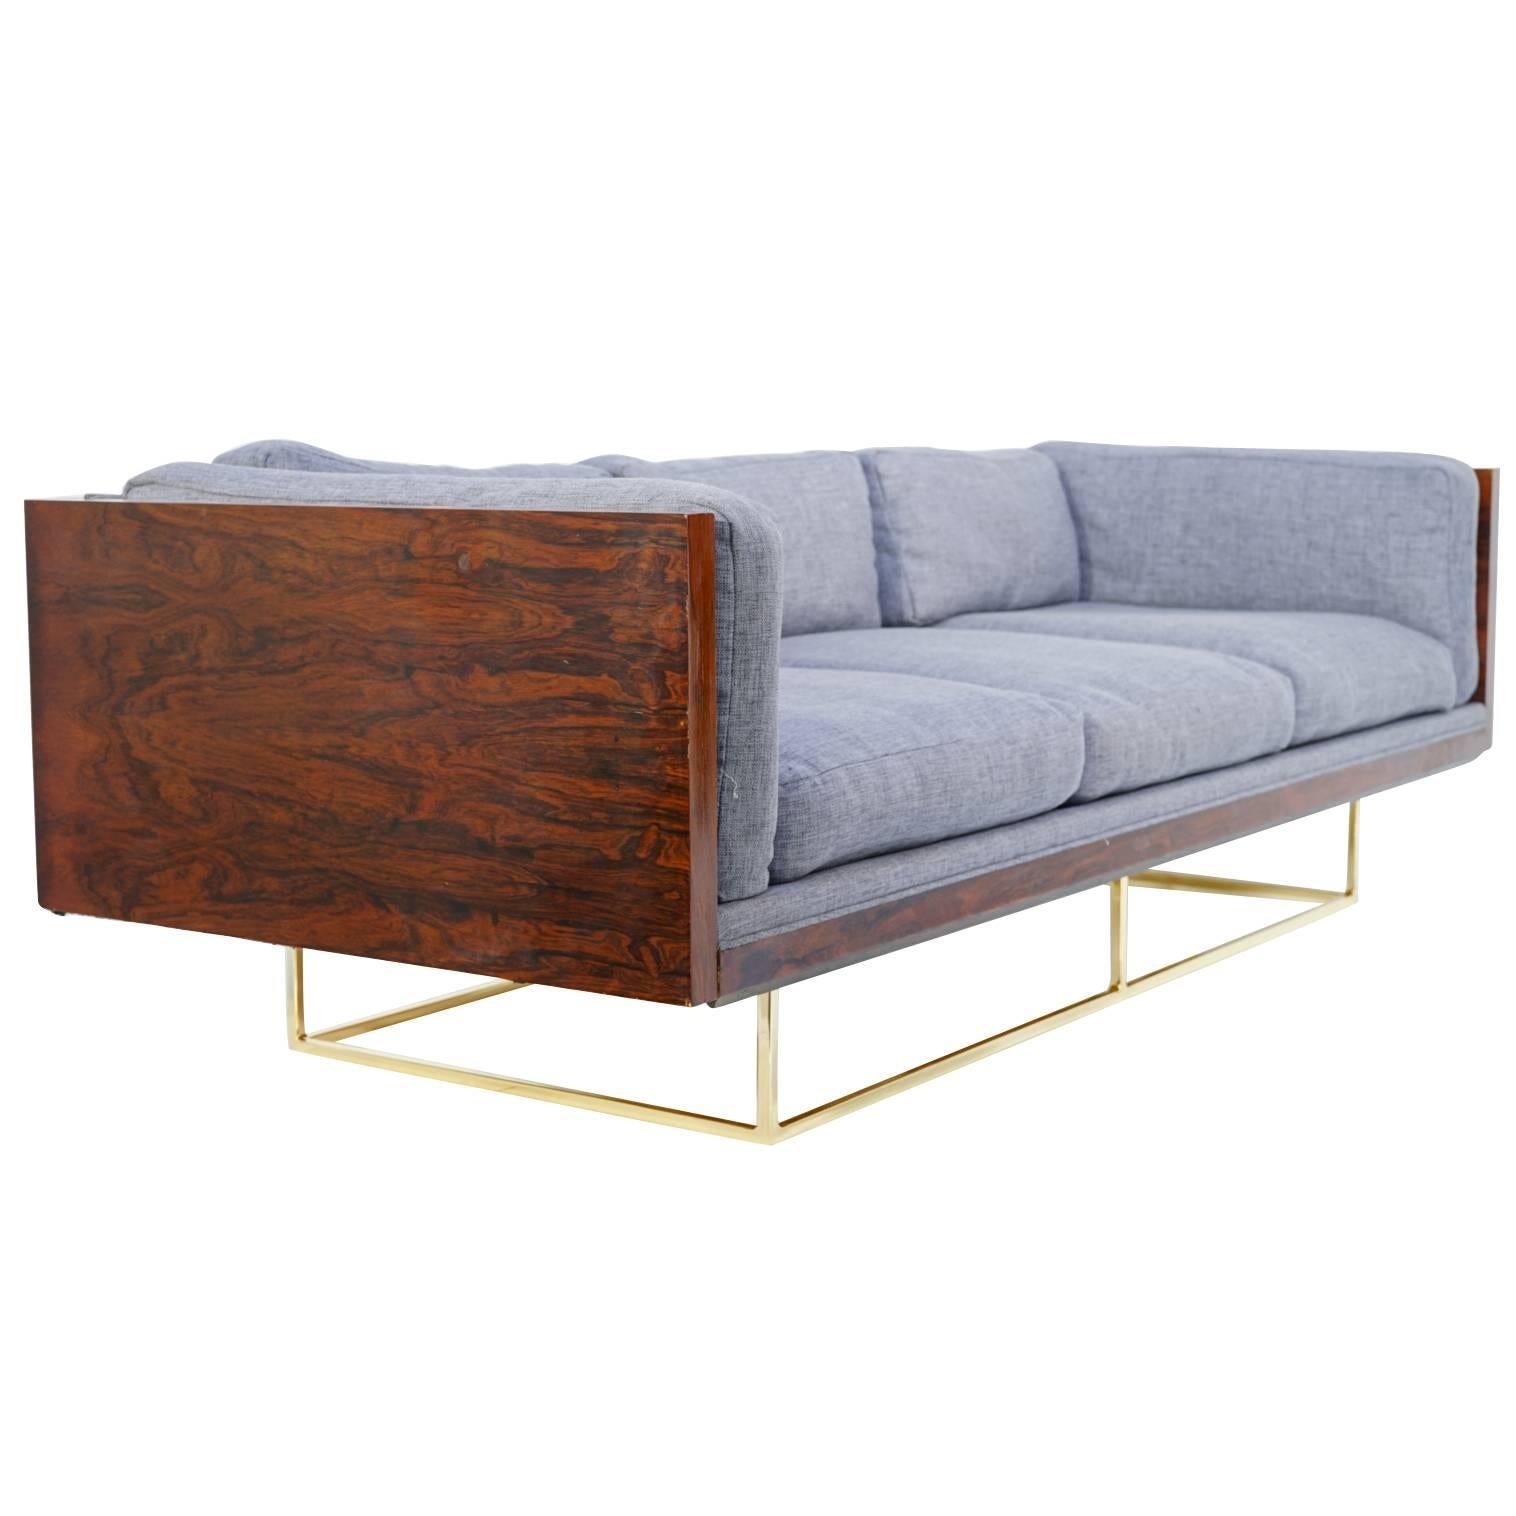 Stunning Milo Baughman Floating Rosewood and Brass Tuxedo Sofa For Sale